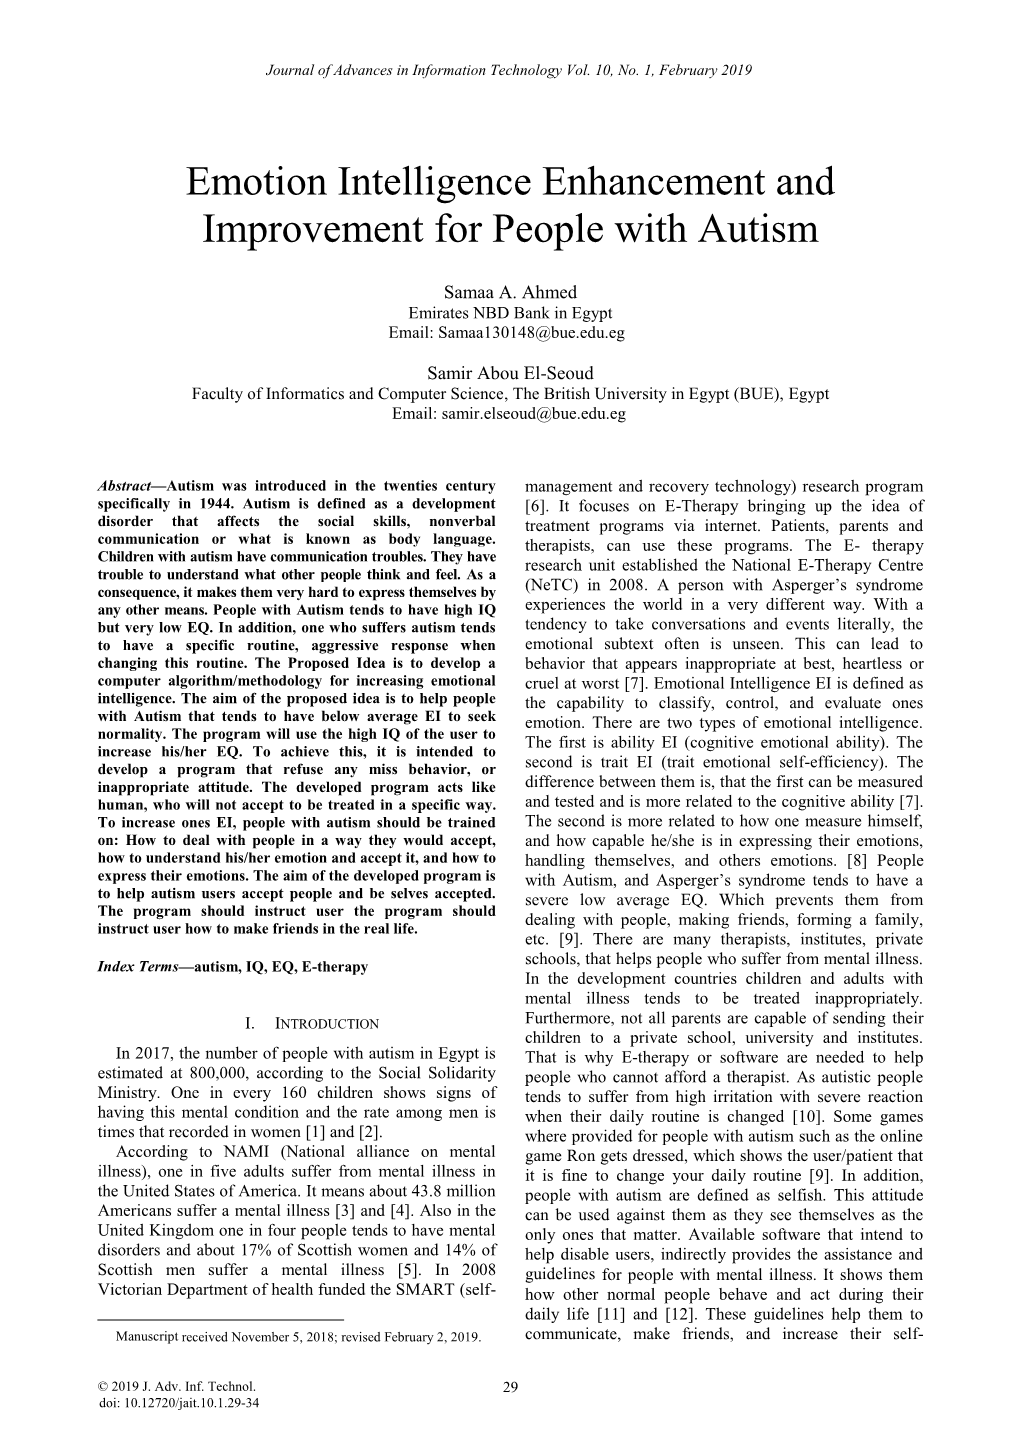 Emotion Intelligence Enhancement and Improvement for People with Autism